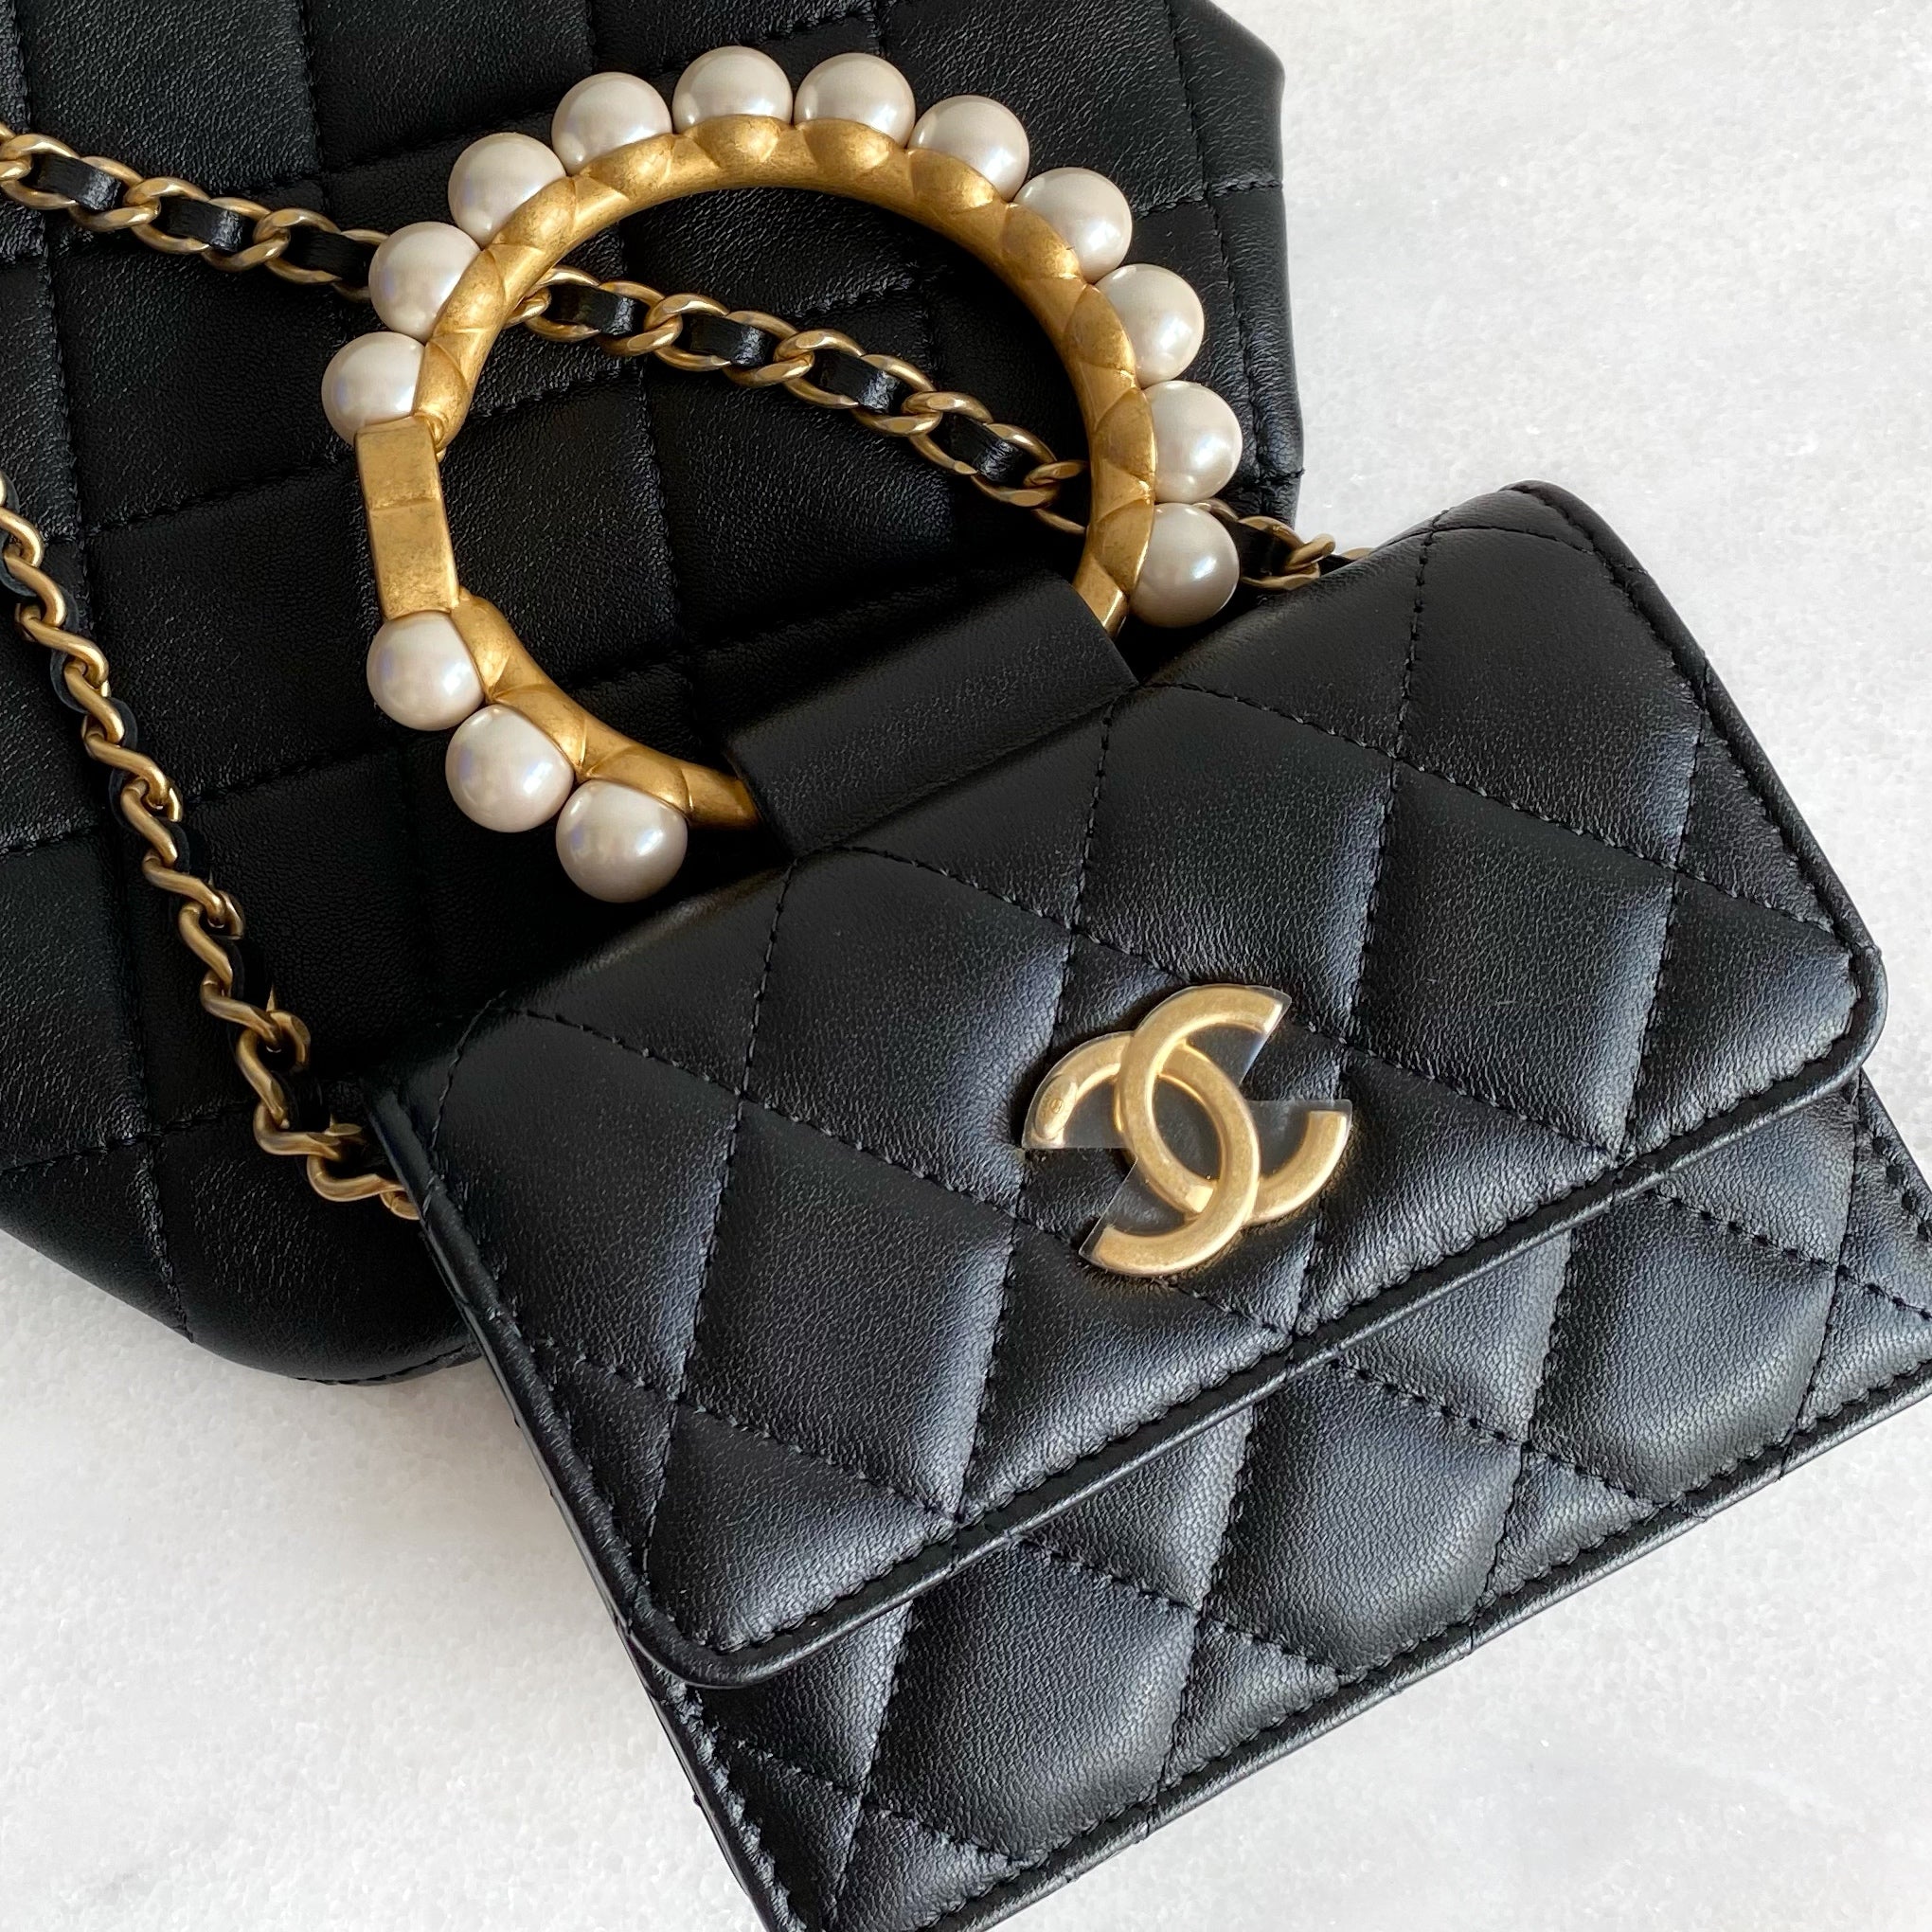 CHANEL  BLUE AND GOLD MINI FLAP BAG IN SEQUINS AND LEATHER WITH